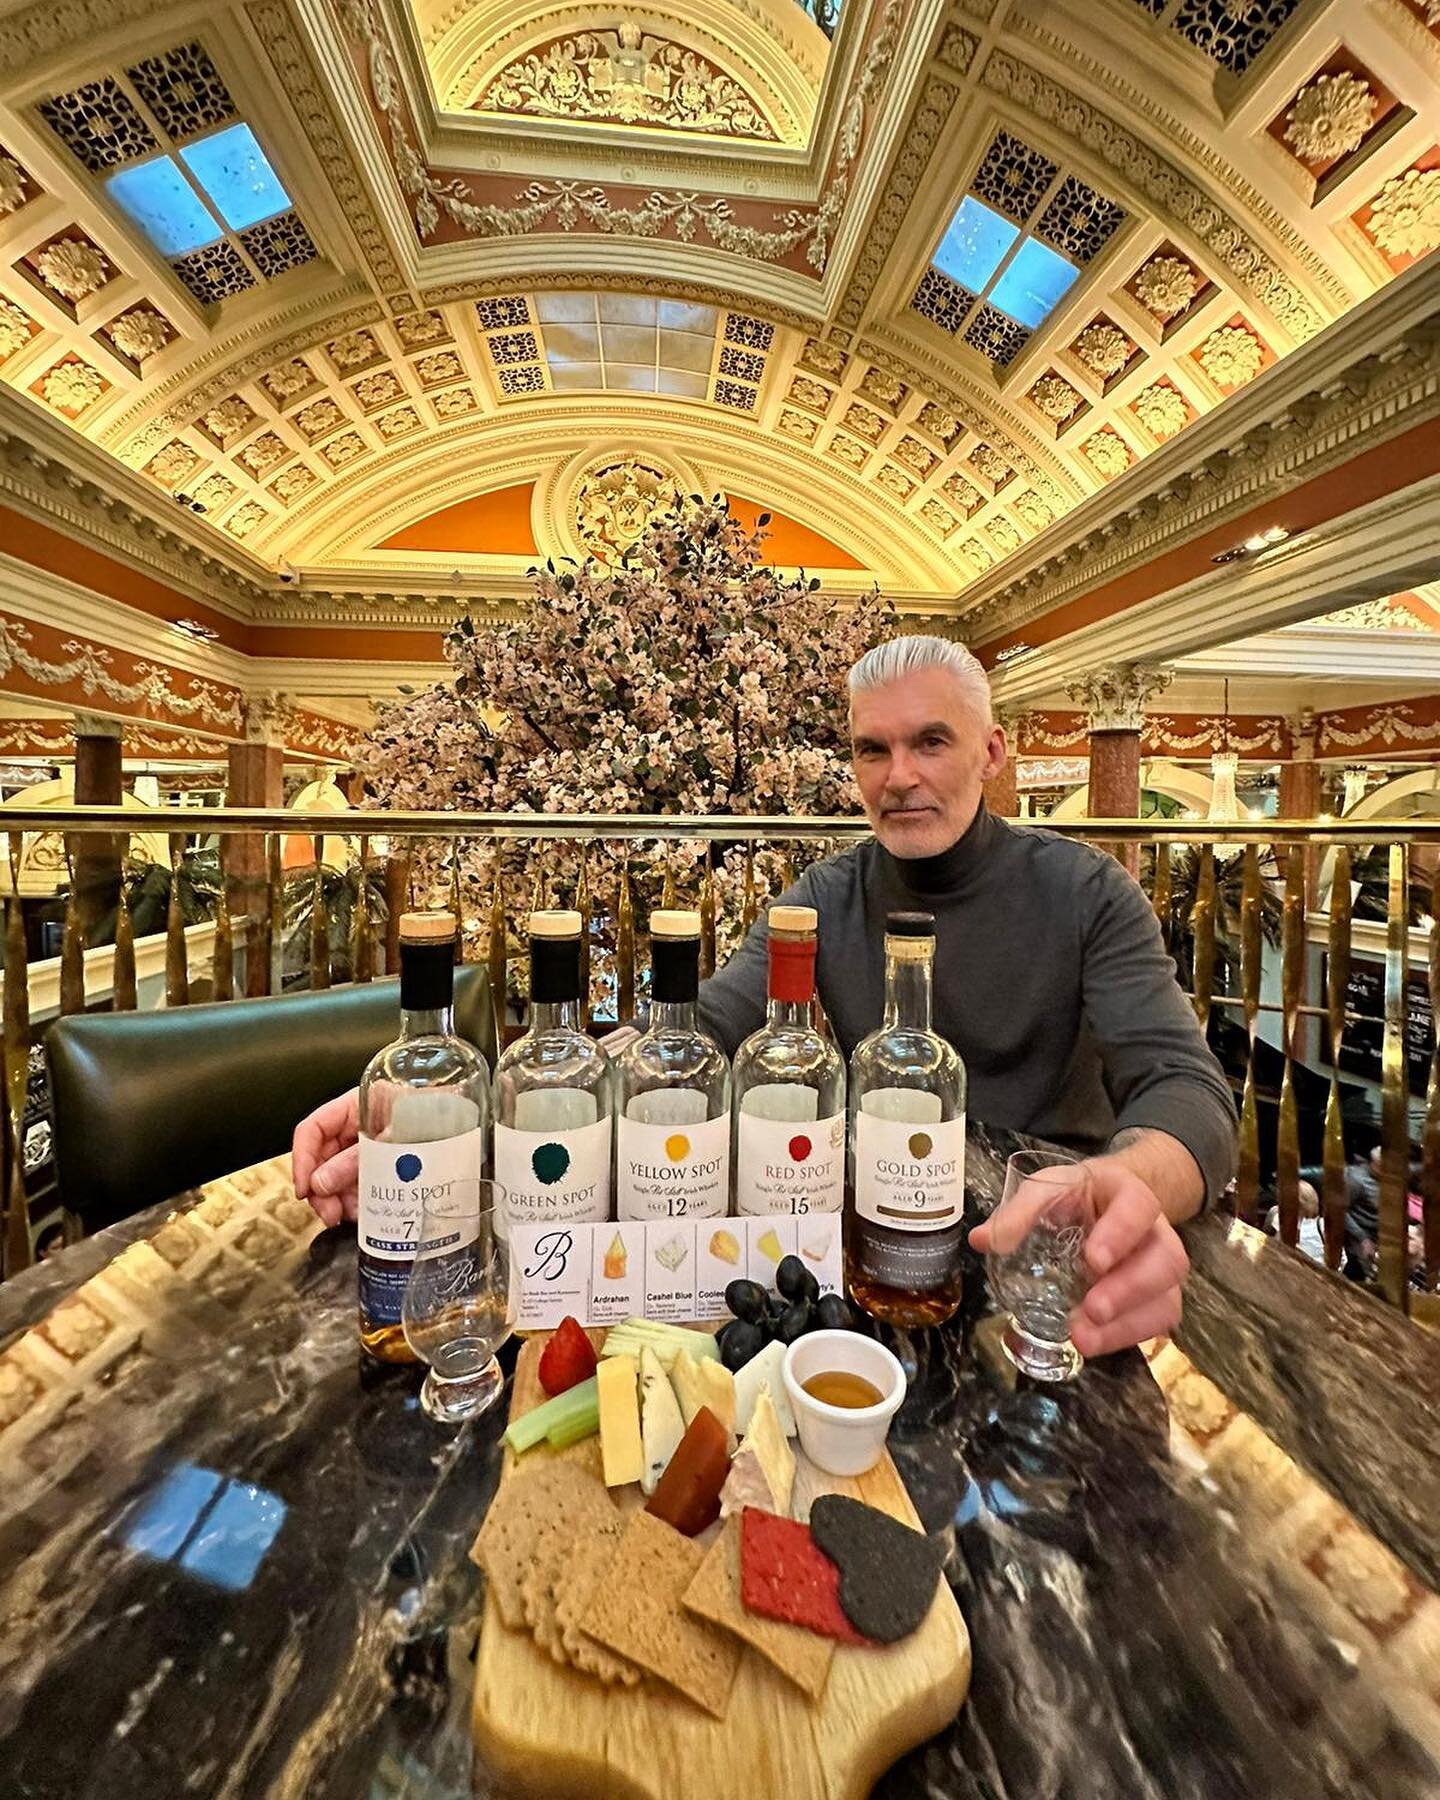 Always a pleasure to do a whiskey tasting in this wonderful building with these wonderful whiskeys accompanied by some great Irish cheeses. #thebankbar #spotwhiskey #bluespotwhiskey #greenspotwhiskey #yellowspotwhiskey #redspotshiskey #goldspotwhiske